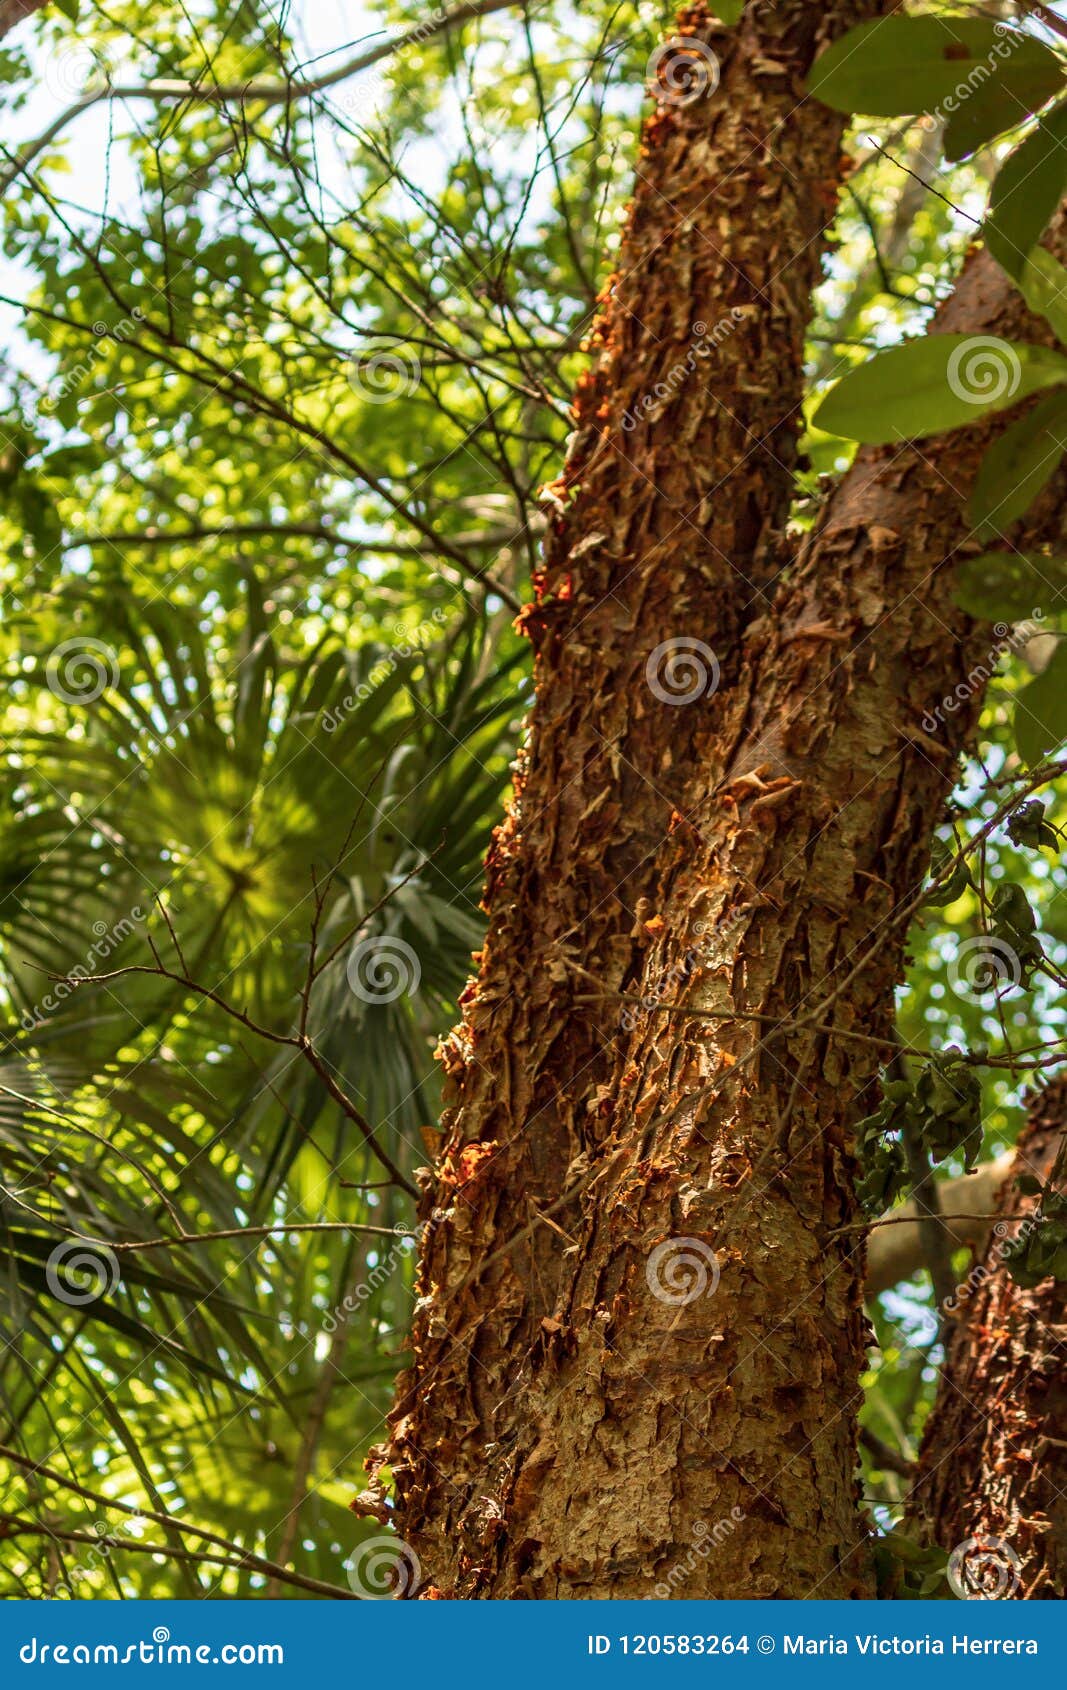 the gumbo-limbo tree is a medicinal plant